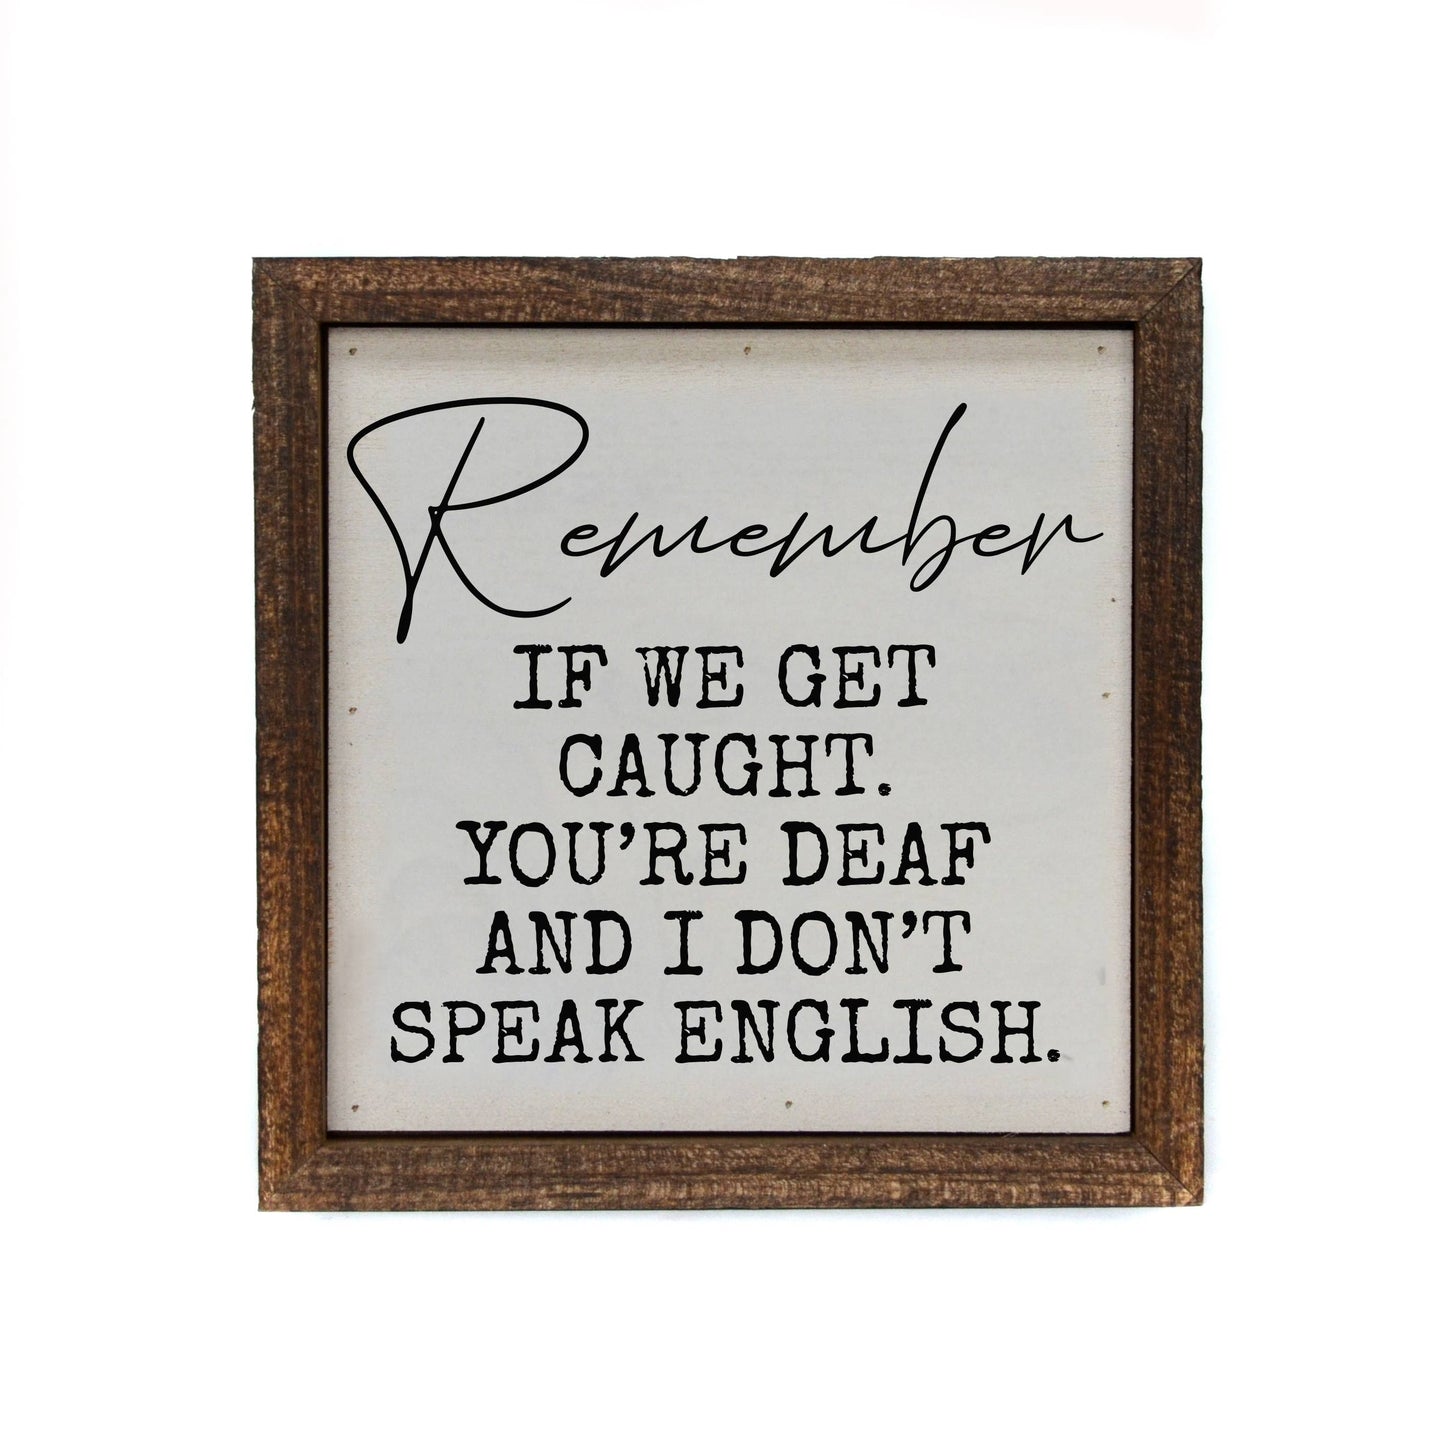 "Remember If We Get Caught You're Deaf and I don't Speak English" Funny Friend Gift Home Décor Wooden Sign